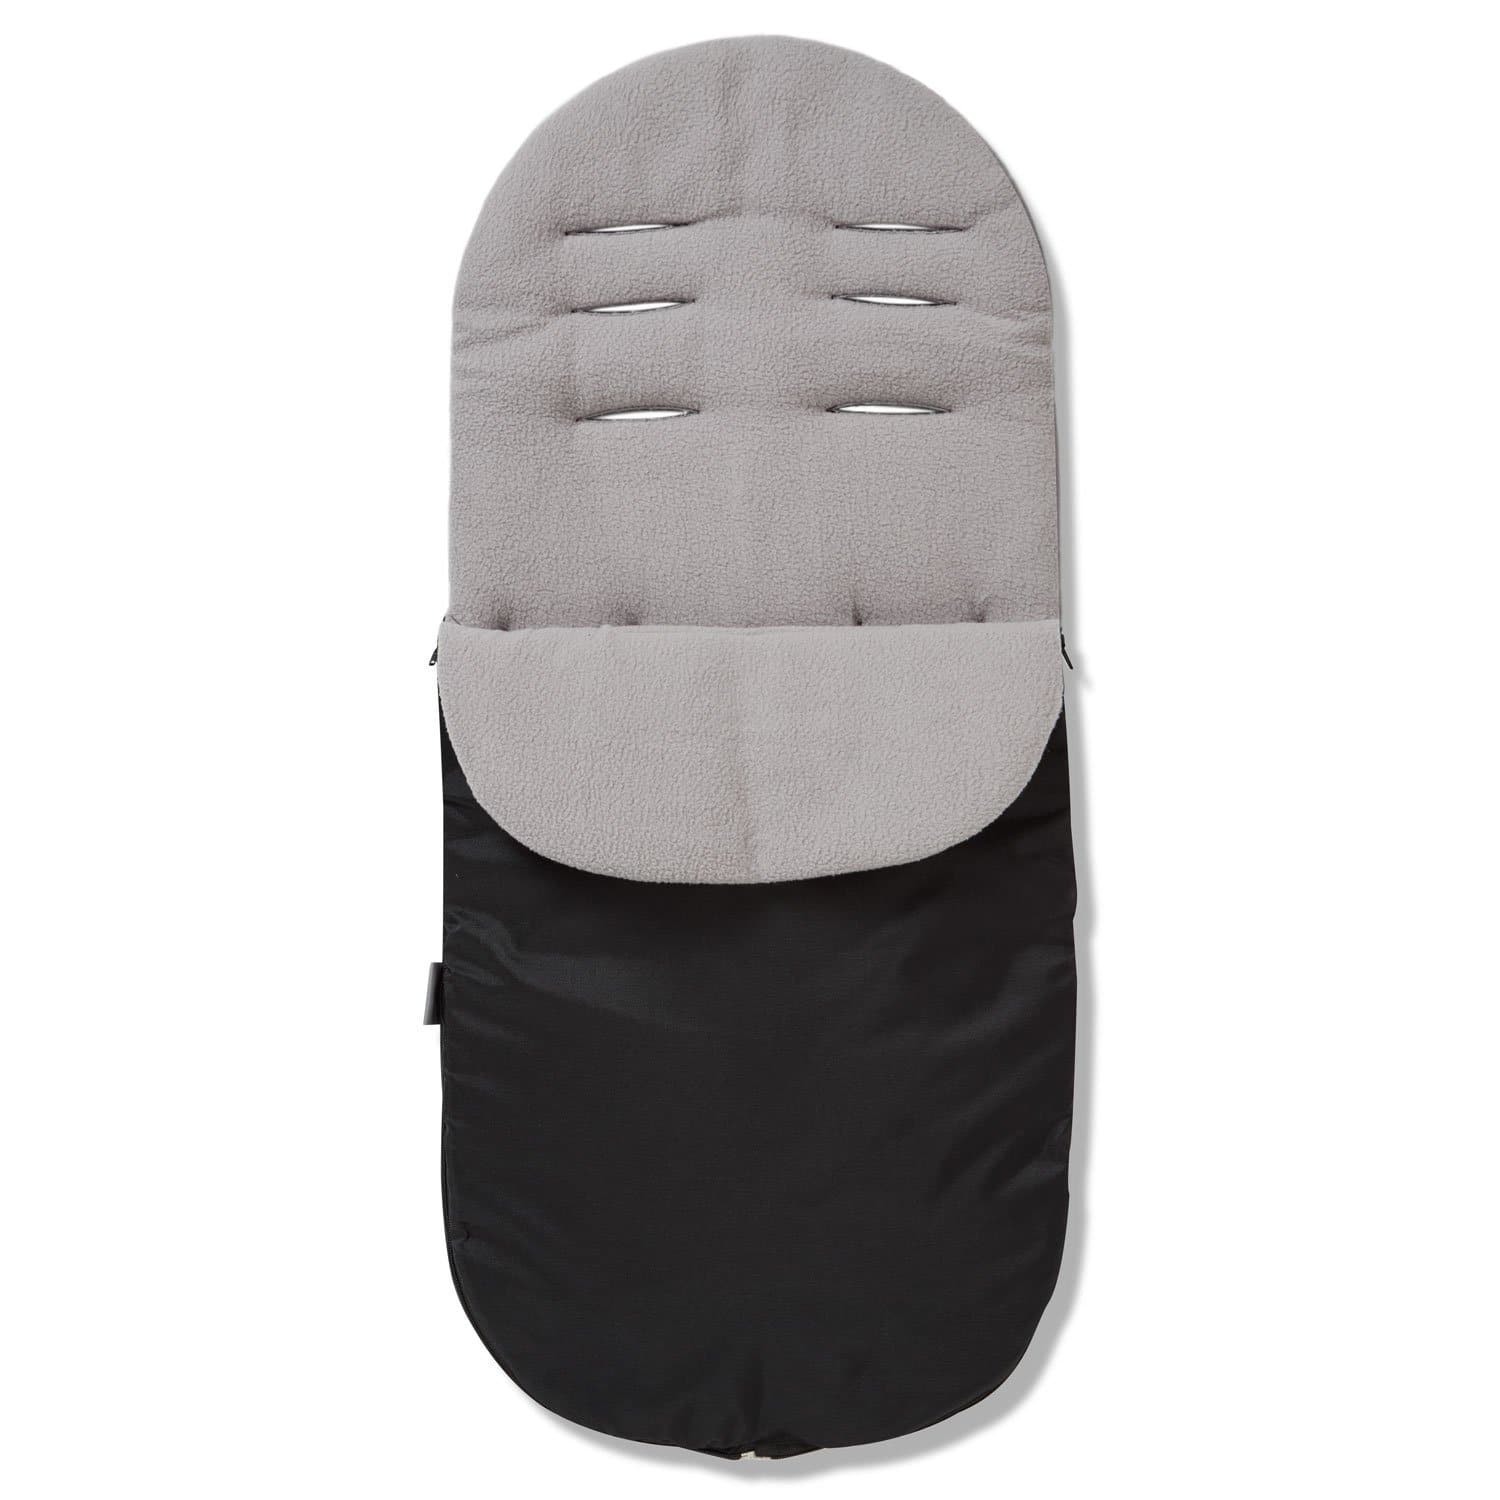 Footmuff / Cosy Toes Compatible with Mima - Grey / Fits All Models | For Your Little One